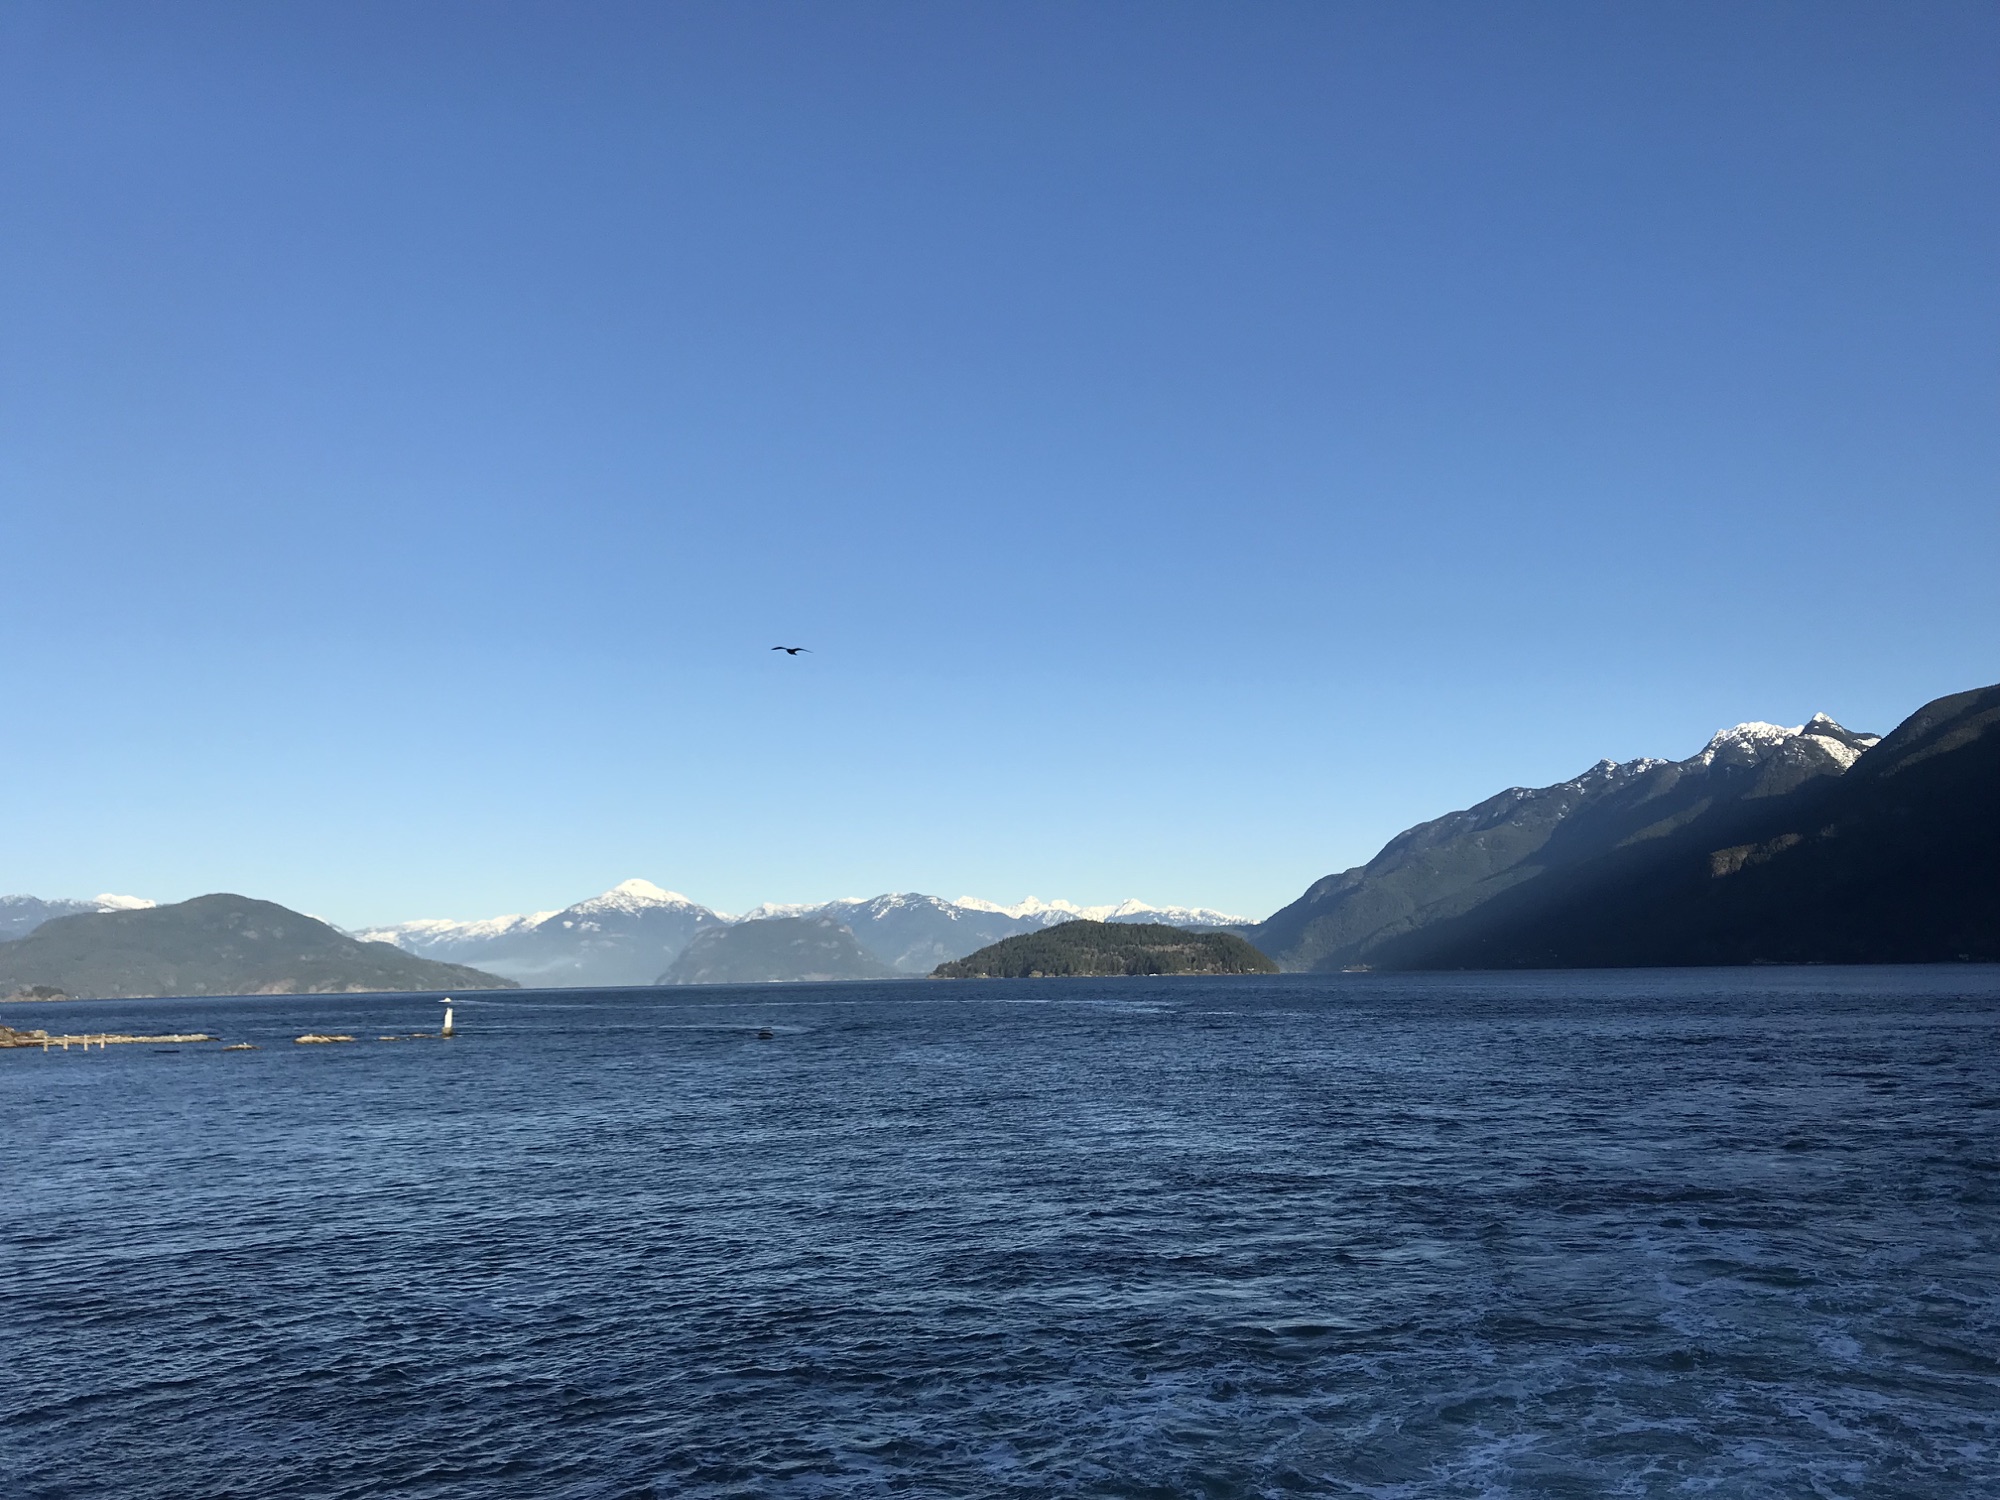 Taking the ferry to Vancouver Island